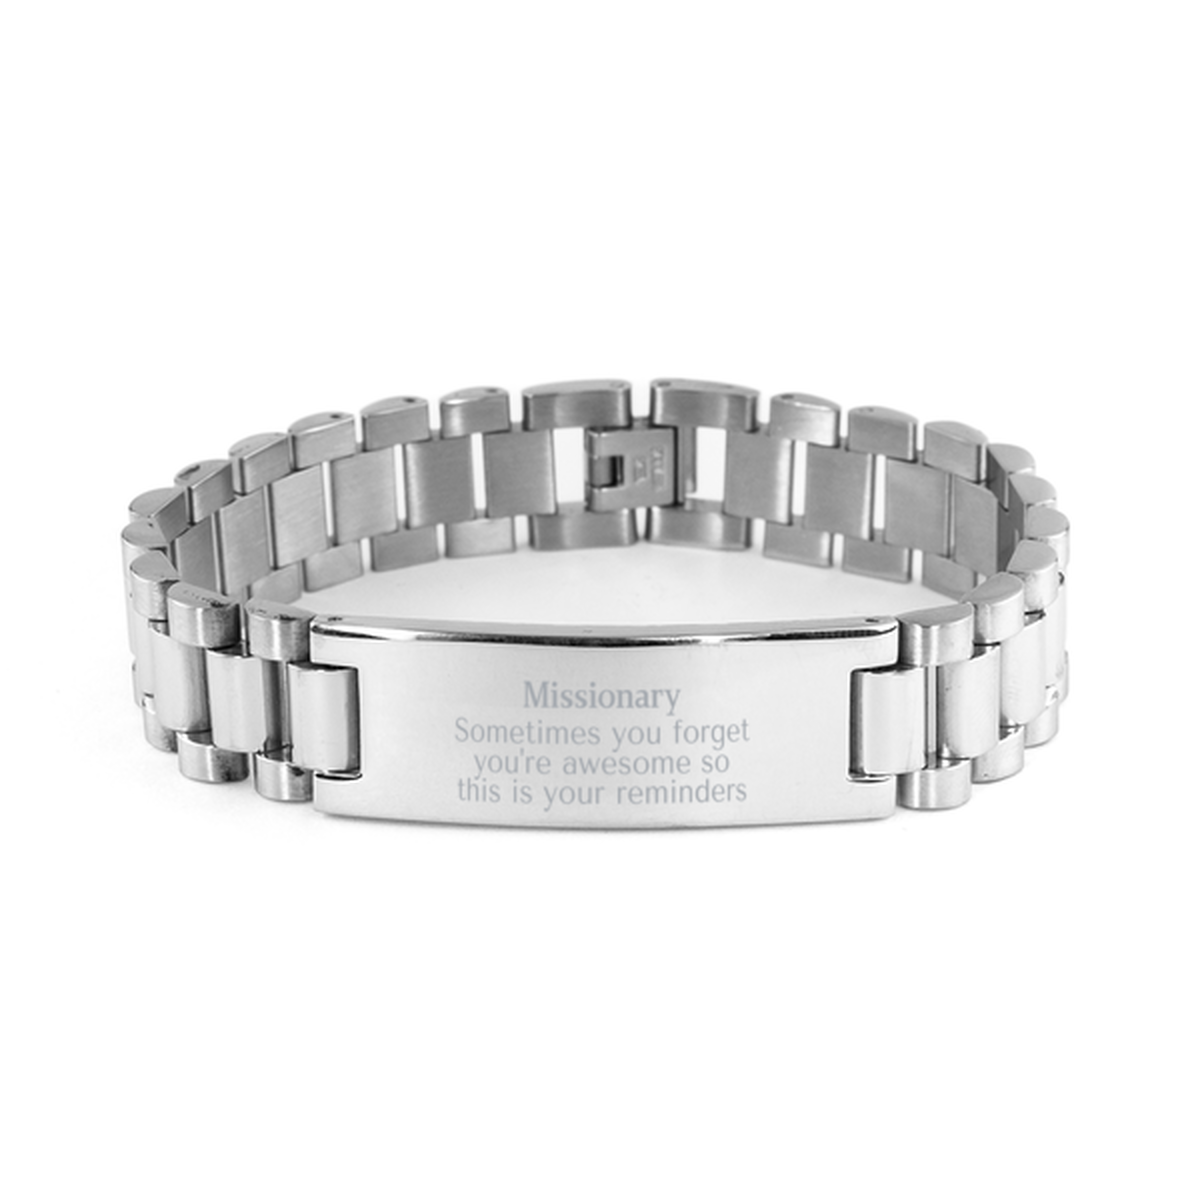 Sentimental Missionary Ladder Stainless Steel Bracelet, Missionary Sometimes you forget you're awesome so this is your reminders, Graduation Christmas Birthday Gifts for Missionary, Men, Women, Coworkers